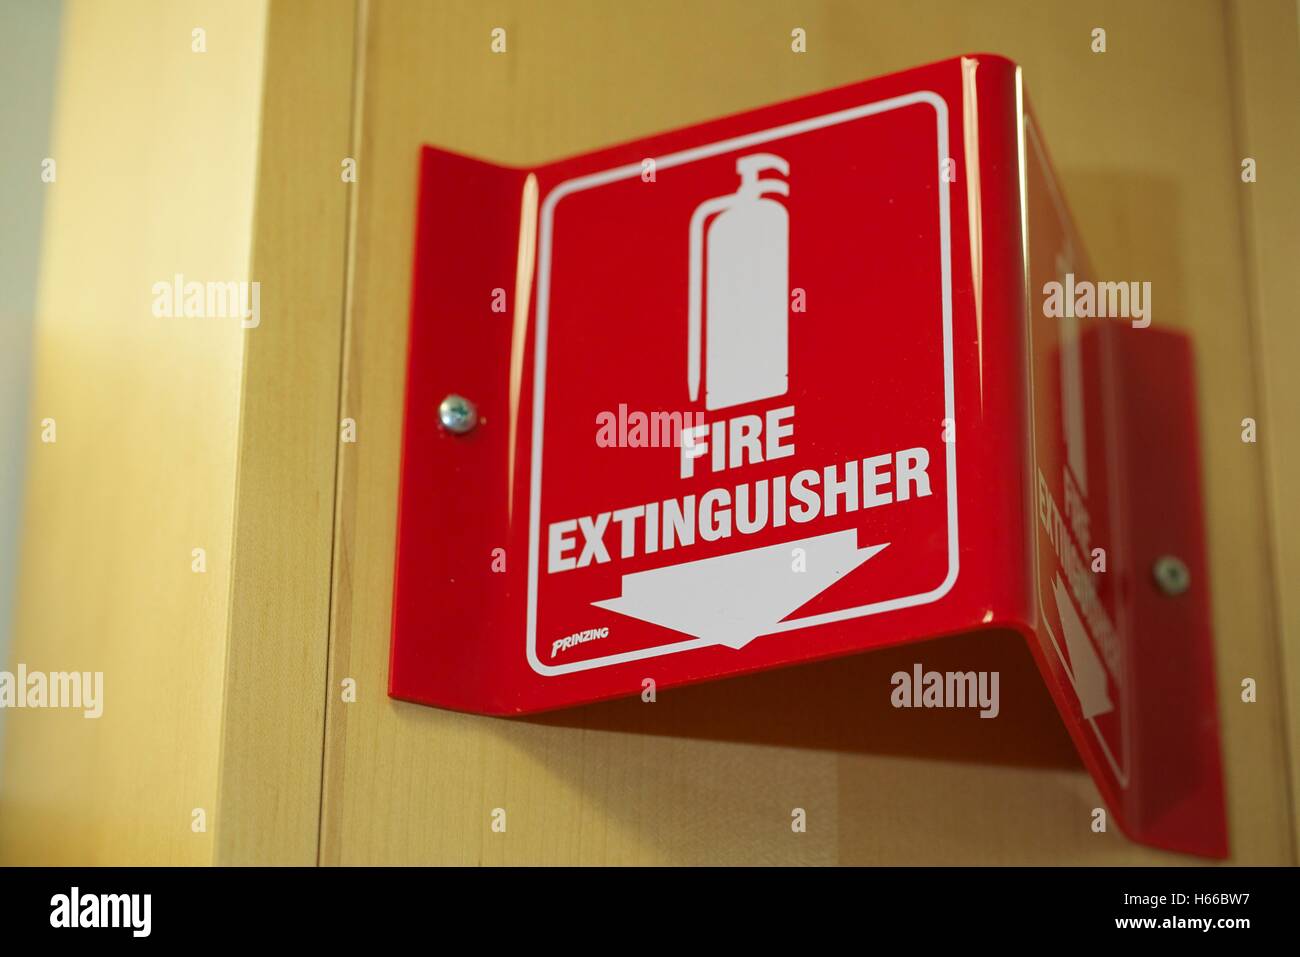 Fire extinguisher sign in research laboratory. Stock Photo